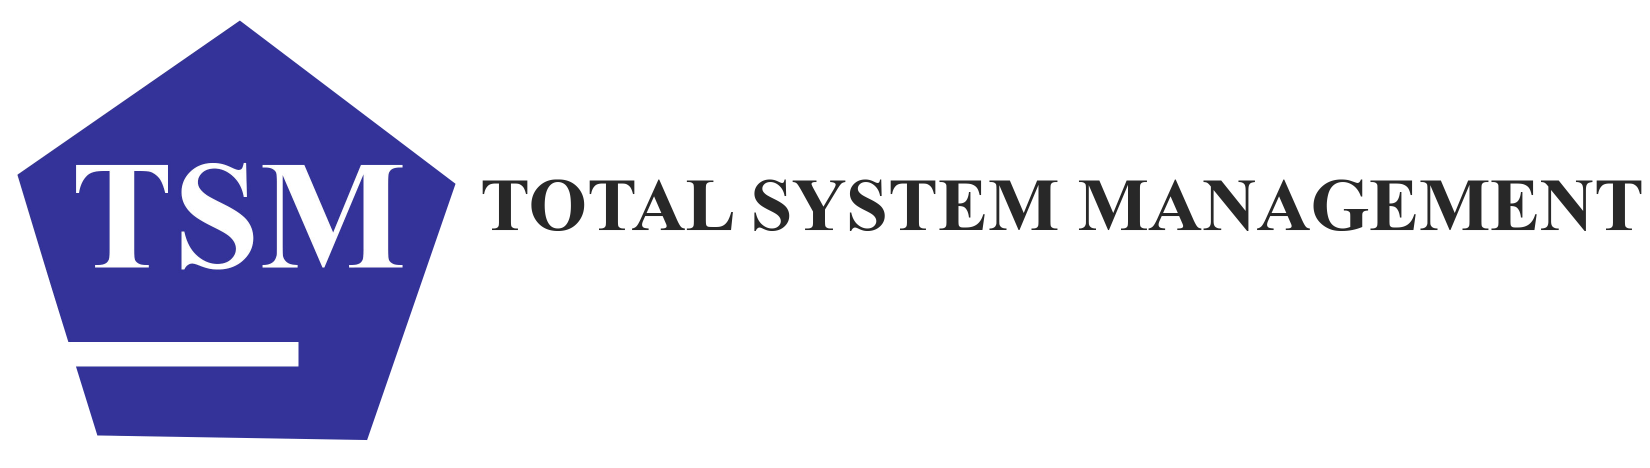 Total System Management SDN BHD